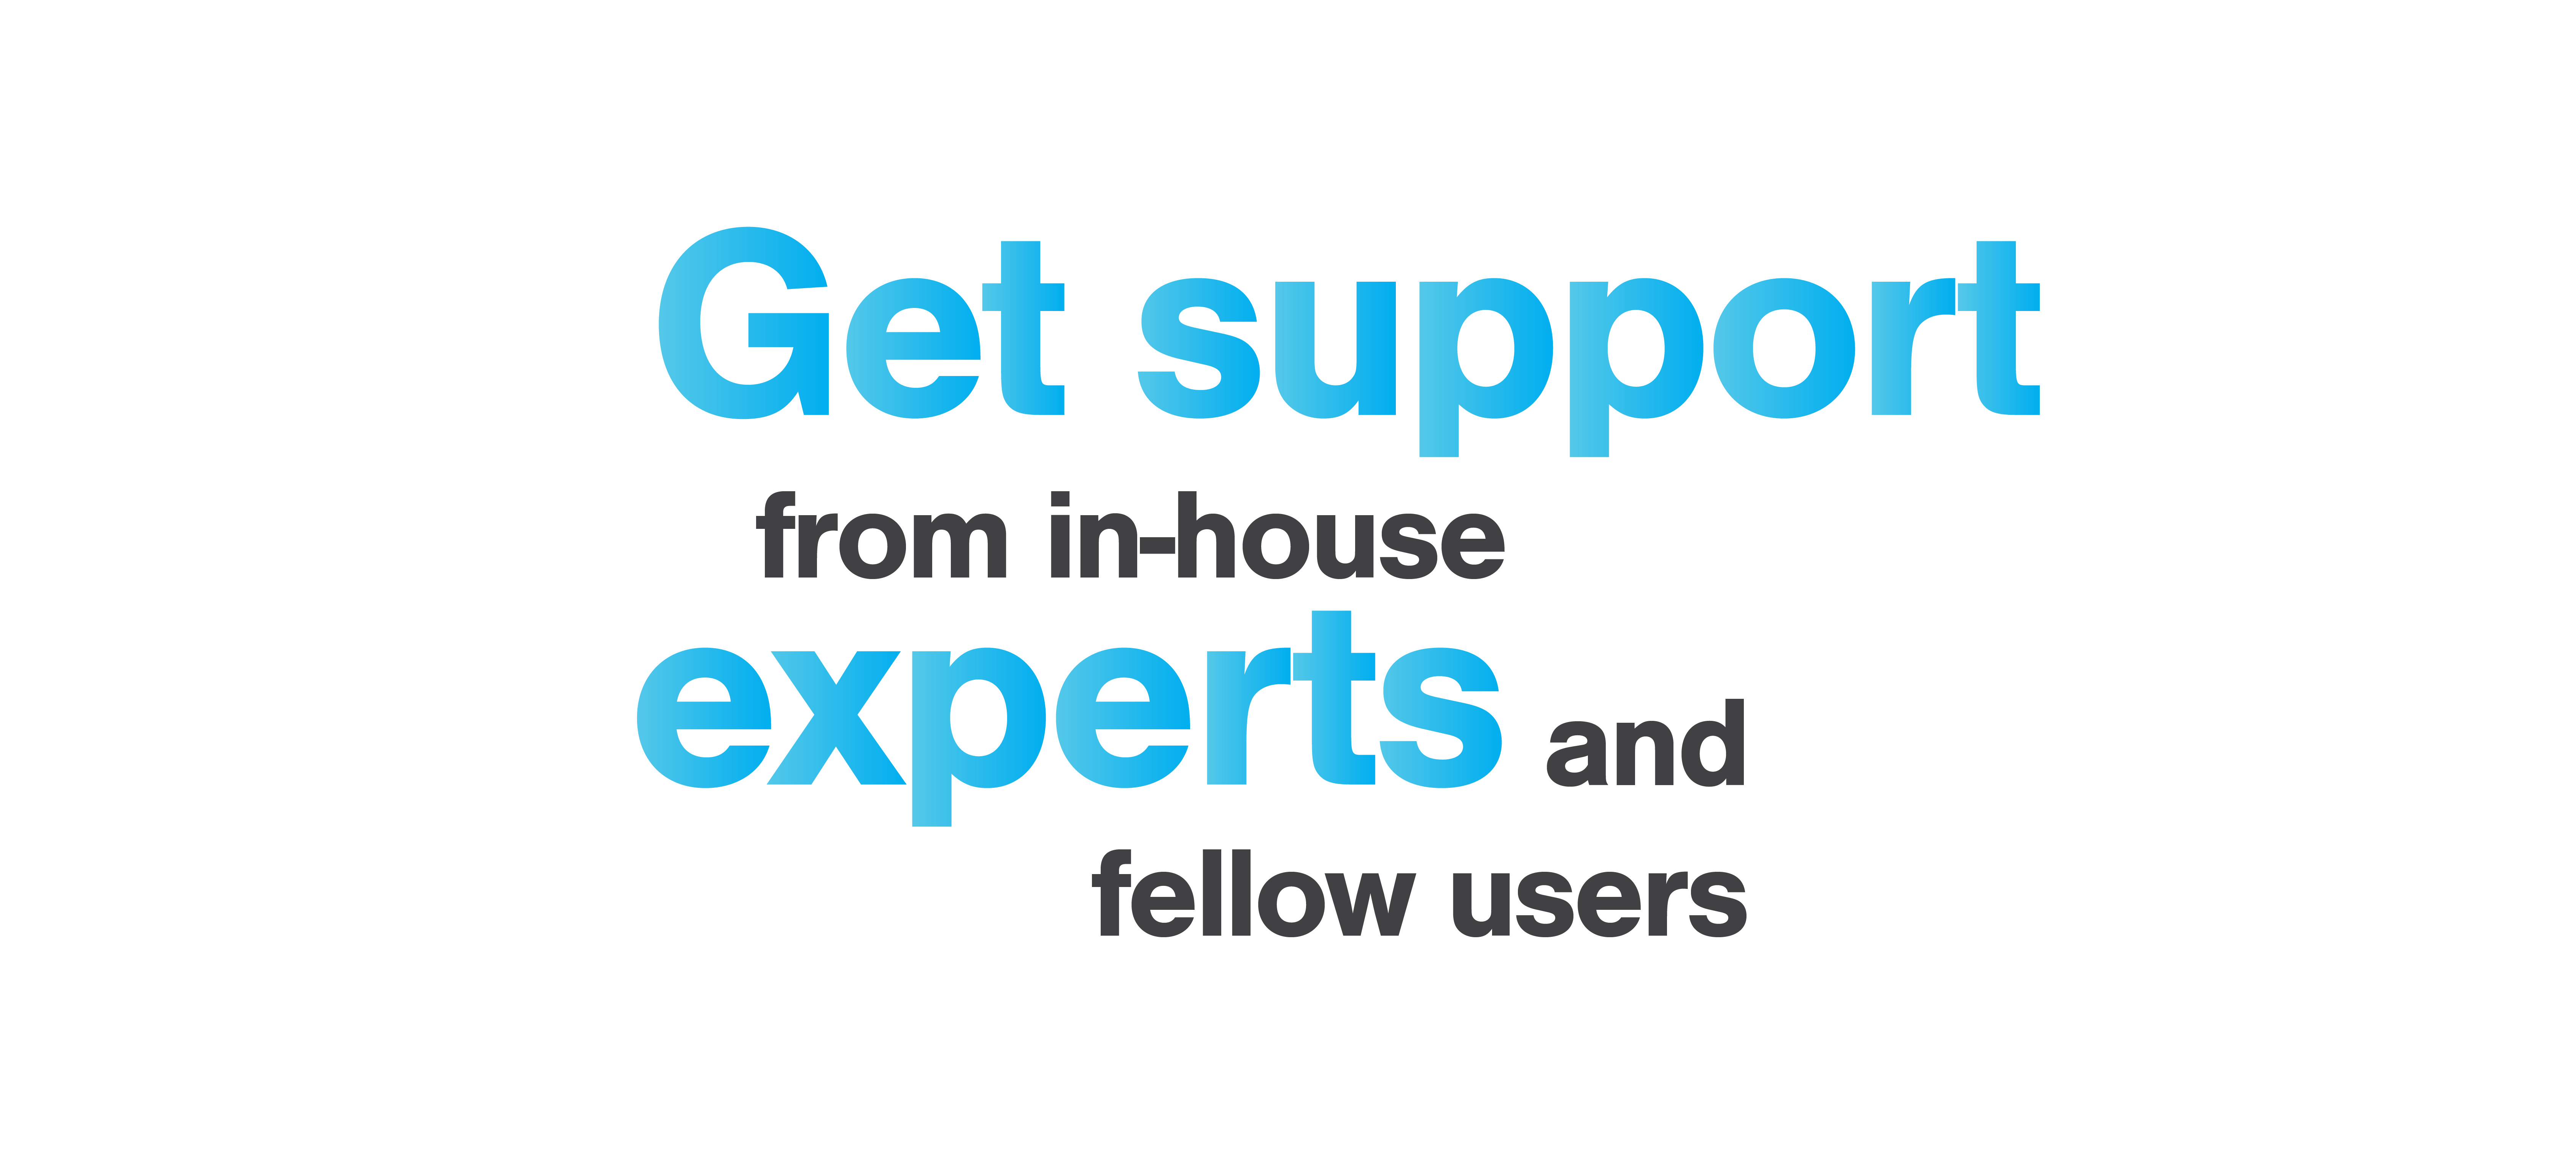 Get support from in-house experts and fellow users